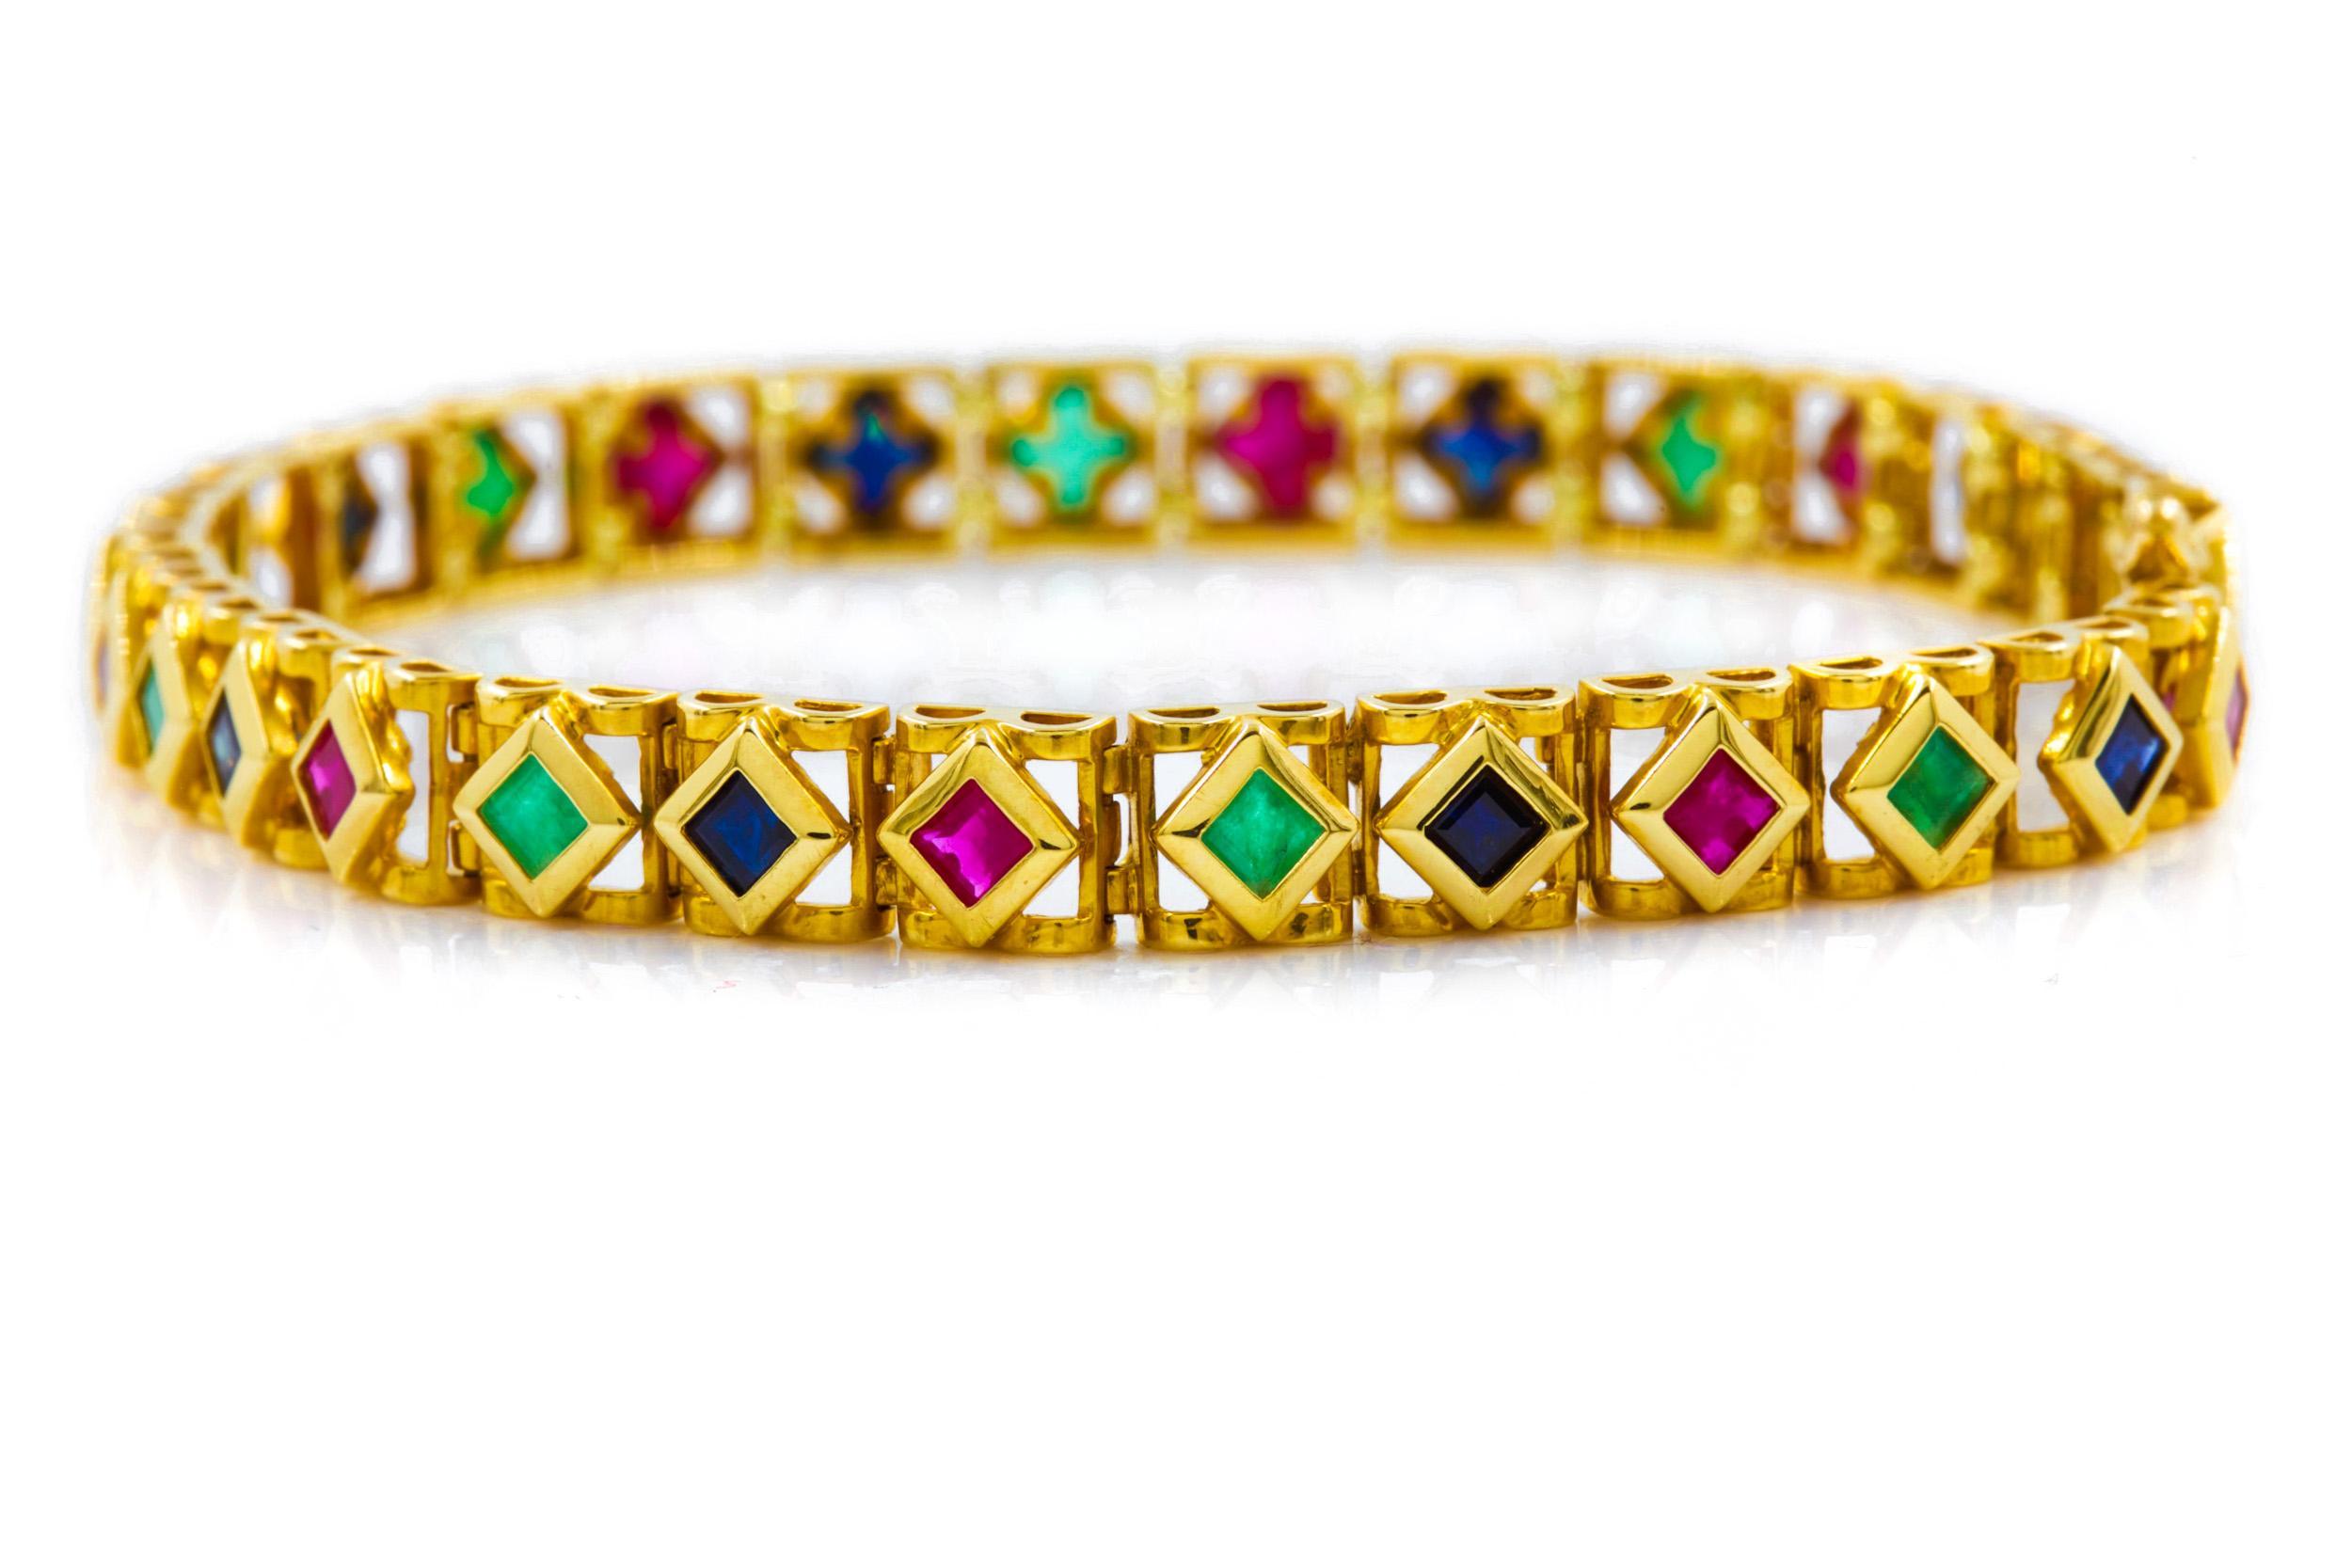 American 14K Yellow Gold Ruby, Emerald and Sapphire Line Bracelet, 7